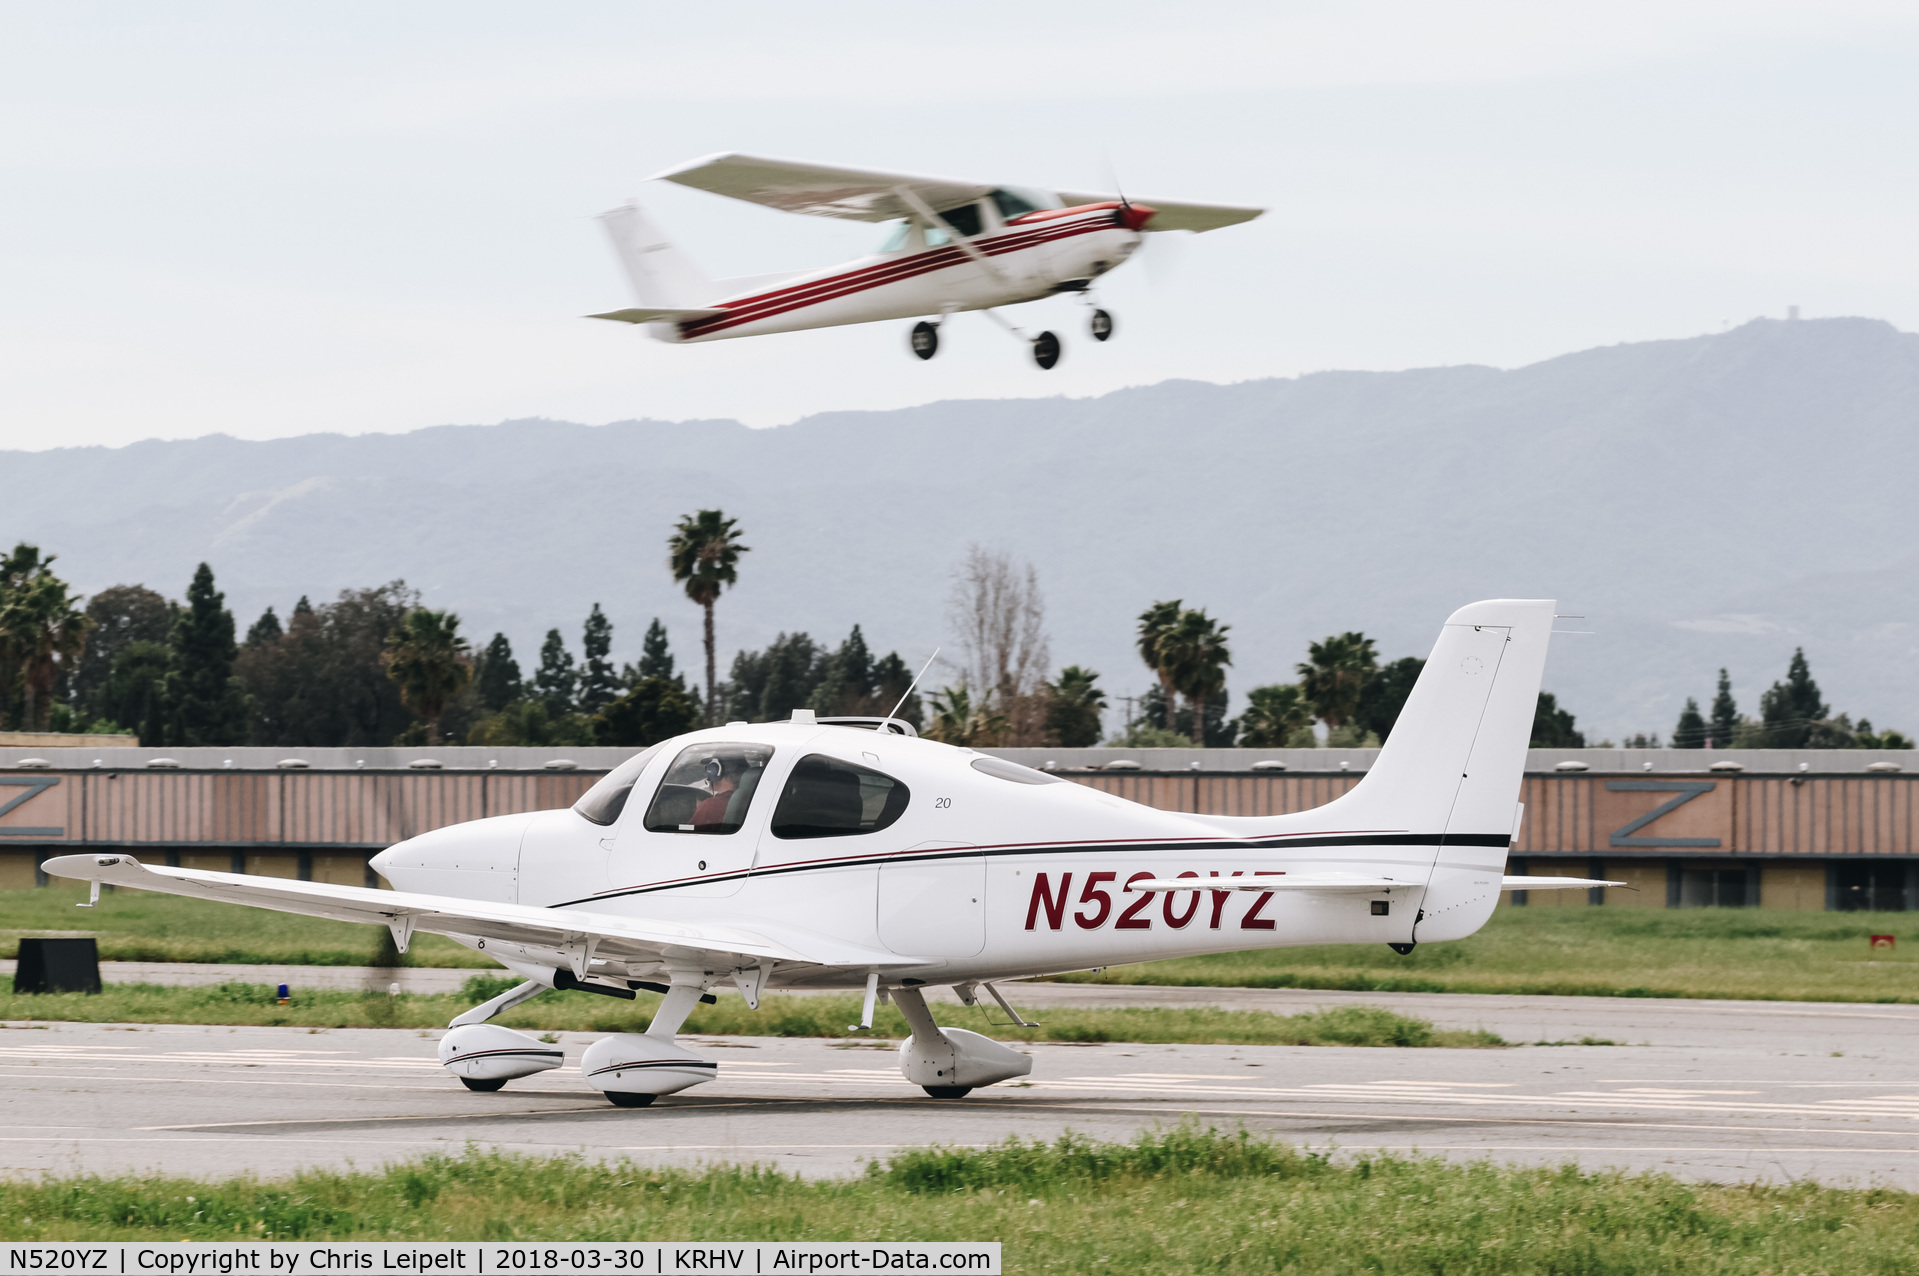 N520YZ, 2015 Cirrus SR20 C/N 2279, 2015 Cirrus SR20 from Hayward taxing out for departure at Reid Hillview Airport, San Jose, CA.